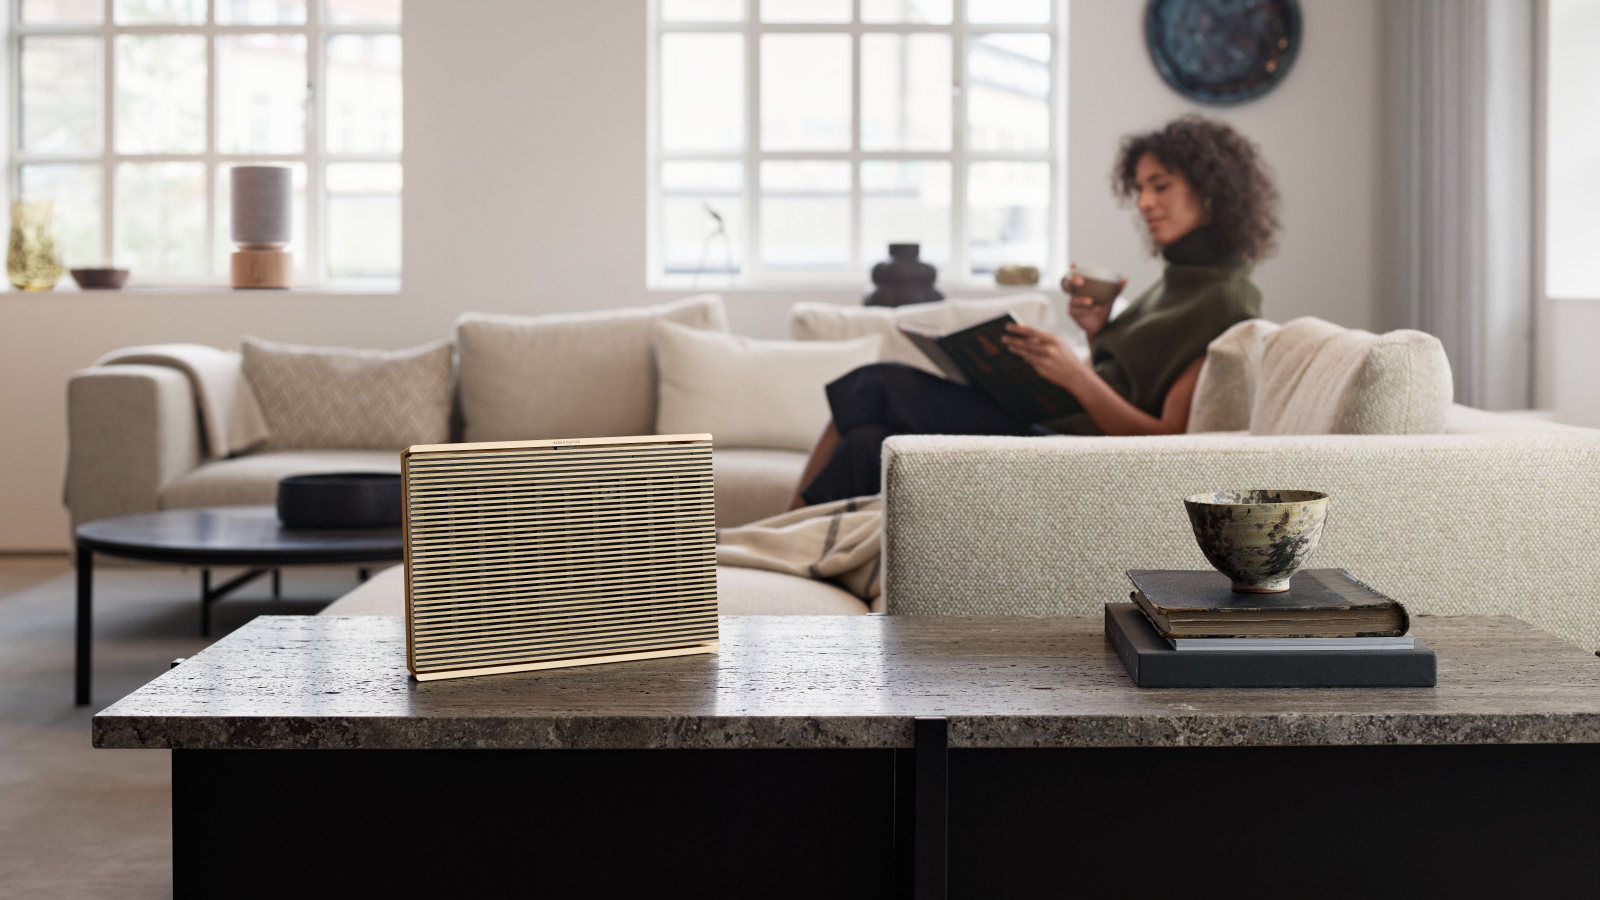 B&O's new modular wireless speaker might be the most beautiful ever